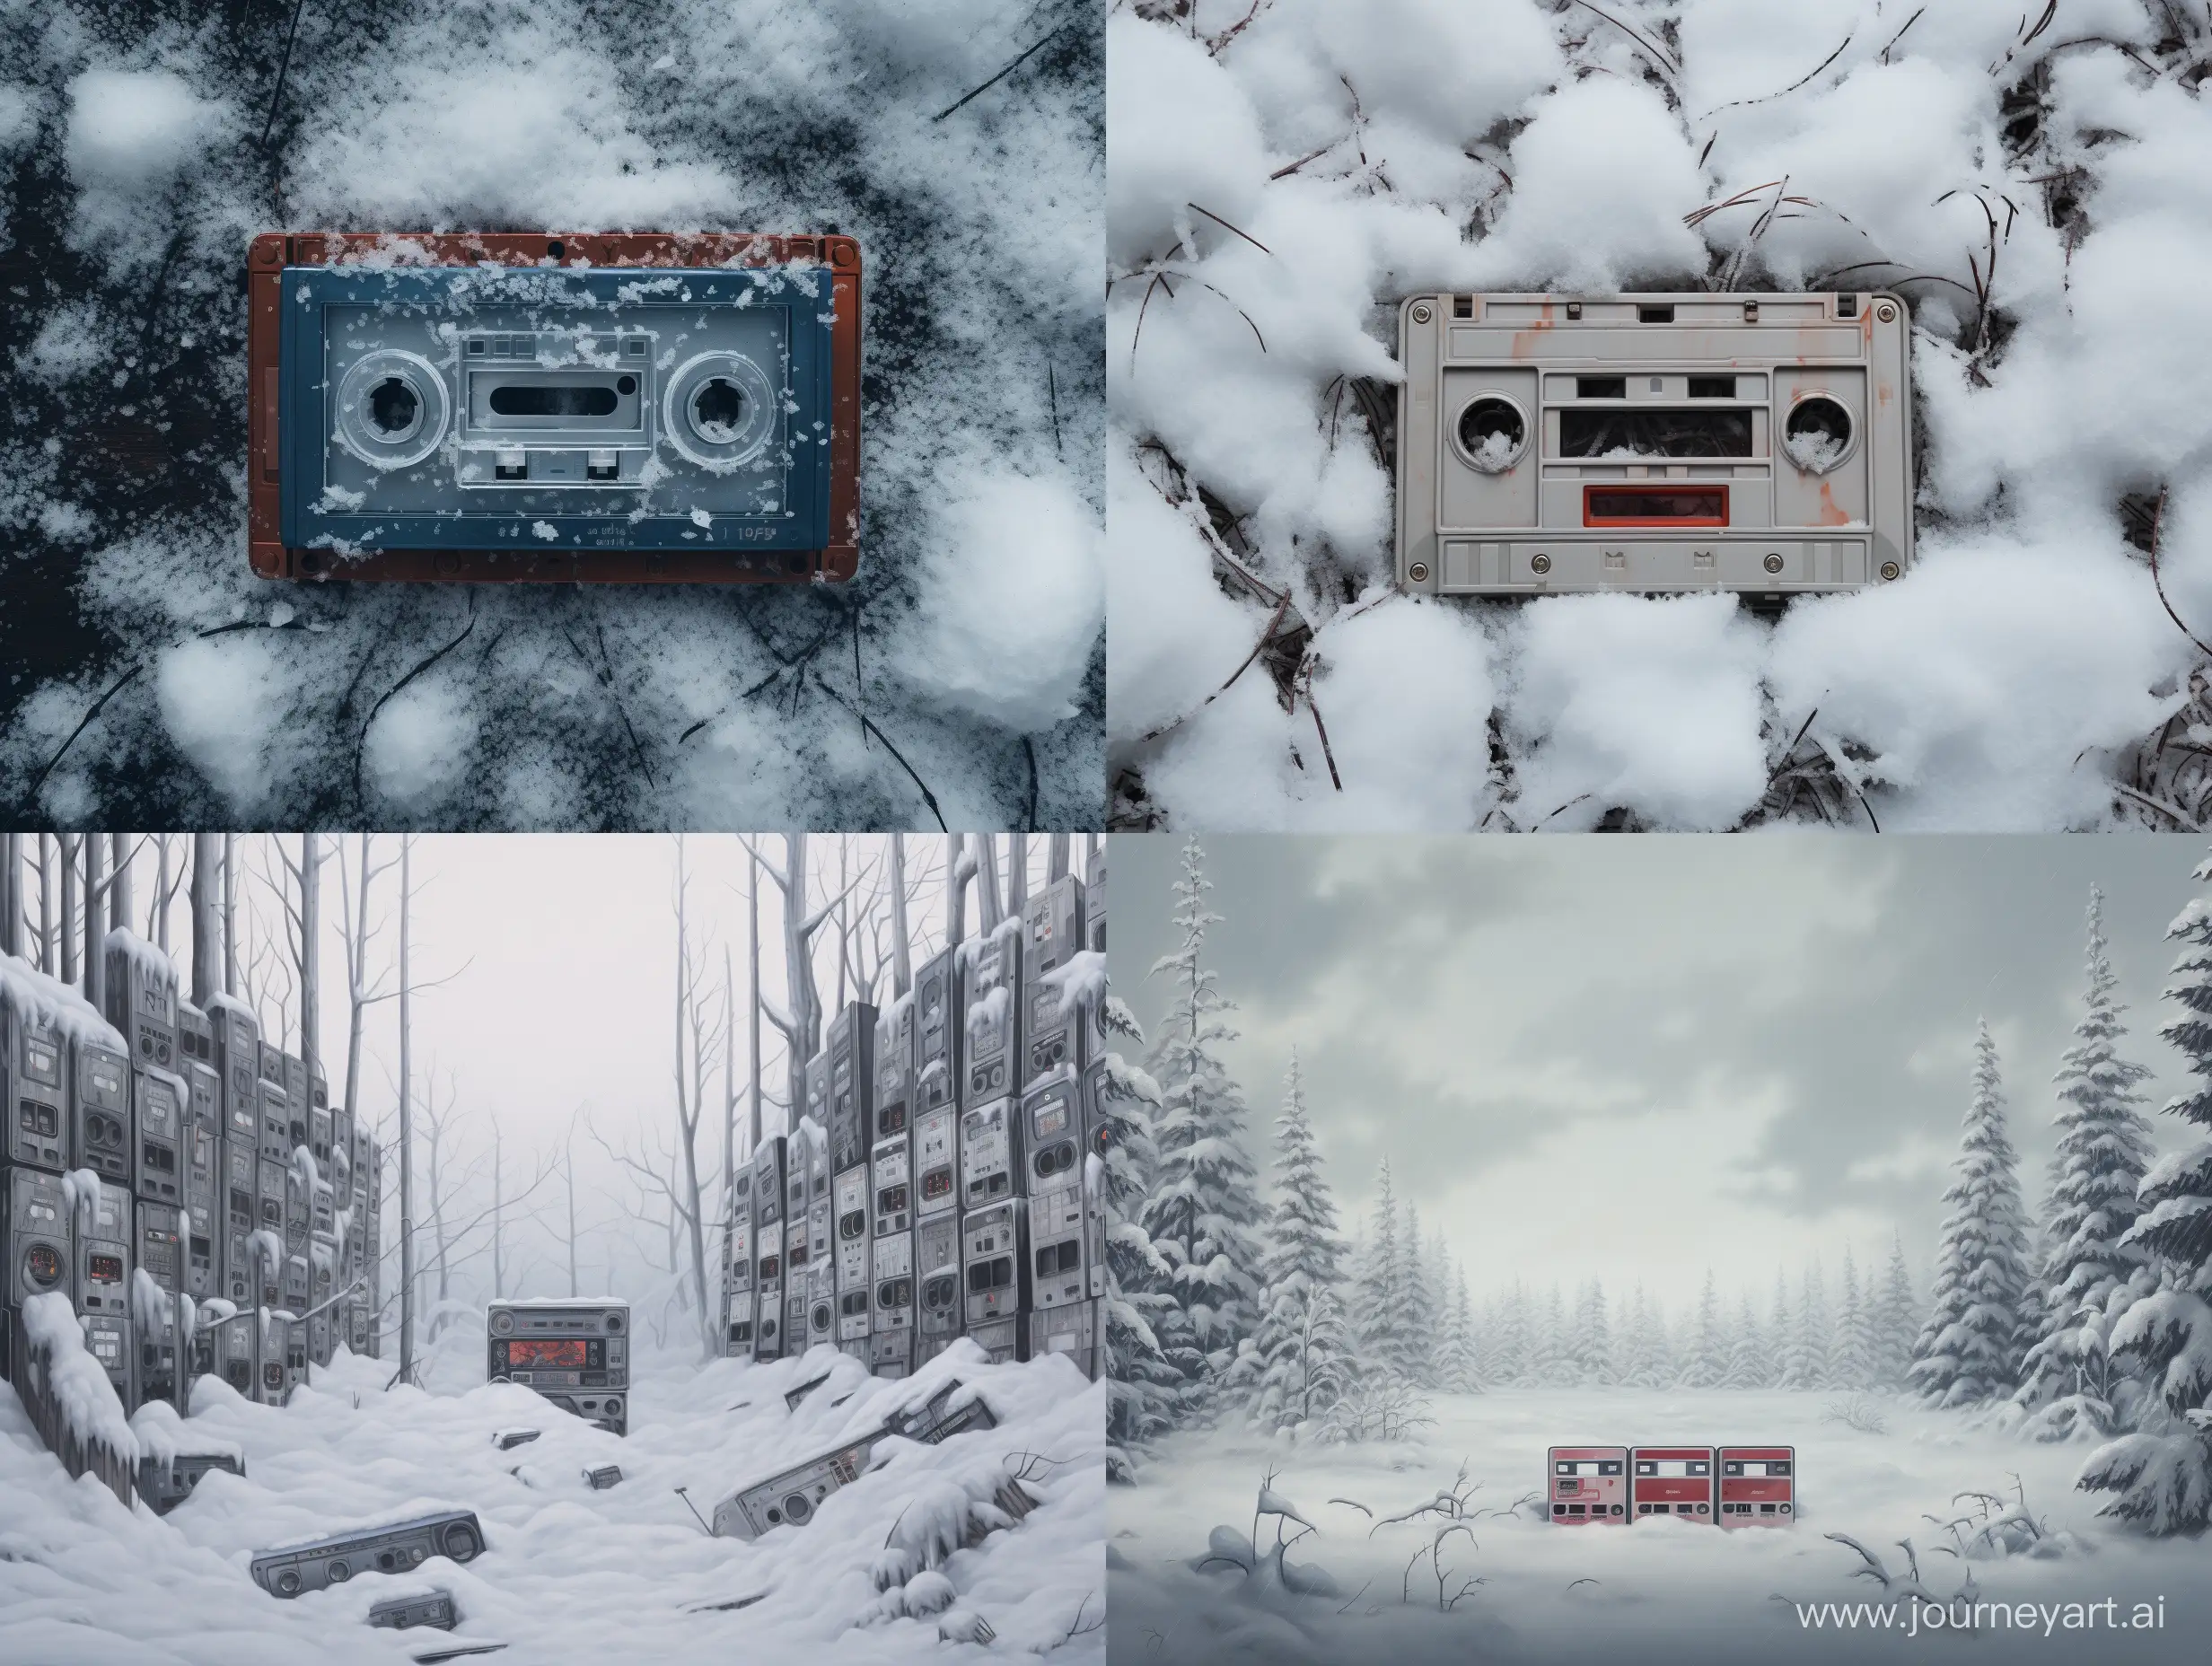 Snowcovered-Cassettes-in-43-Aspect-Ratio-Vintage-Nostalgia-Amidst-Winters-Blanket